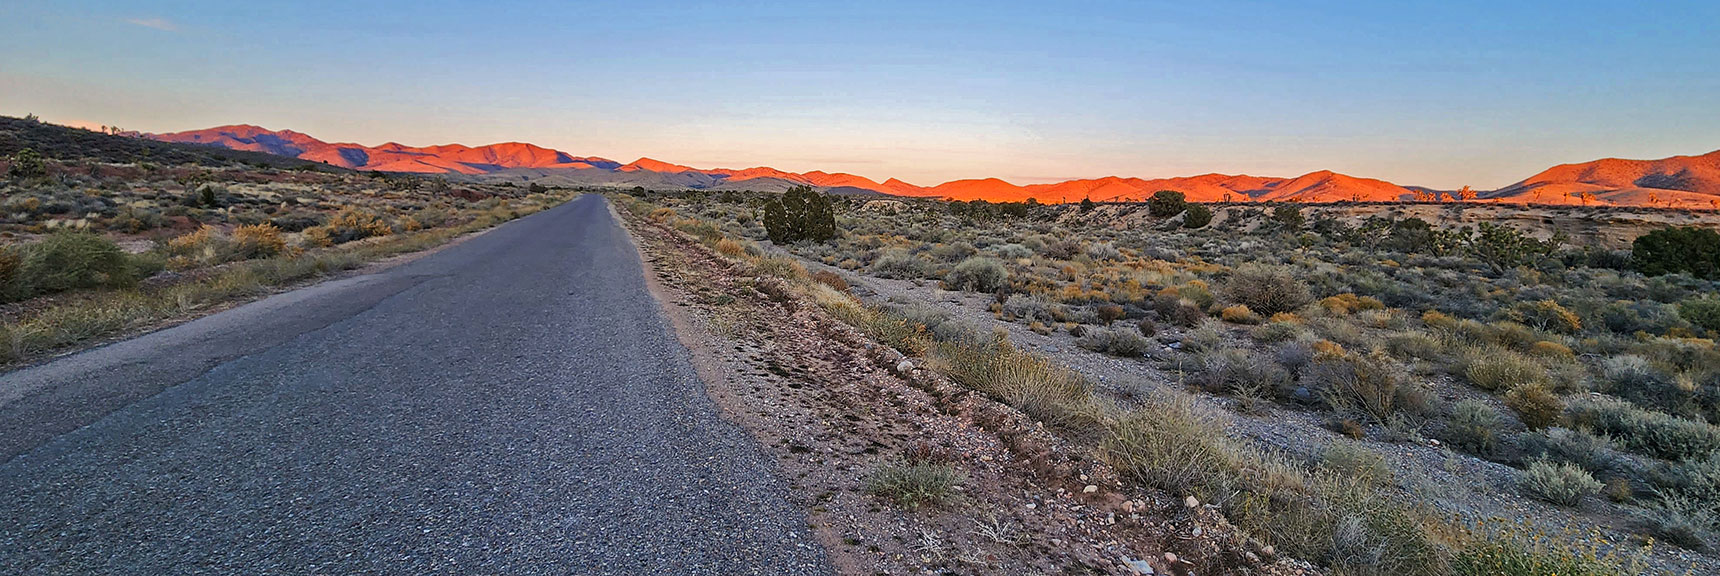 View North Up Lovell Canyon Road During Sunset | Landmark Bluff Summit | Lovell Canyon, Nevada